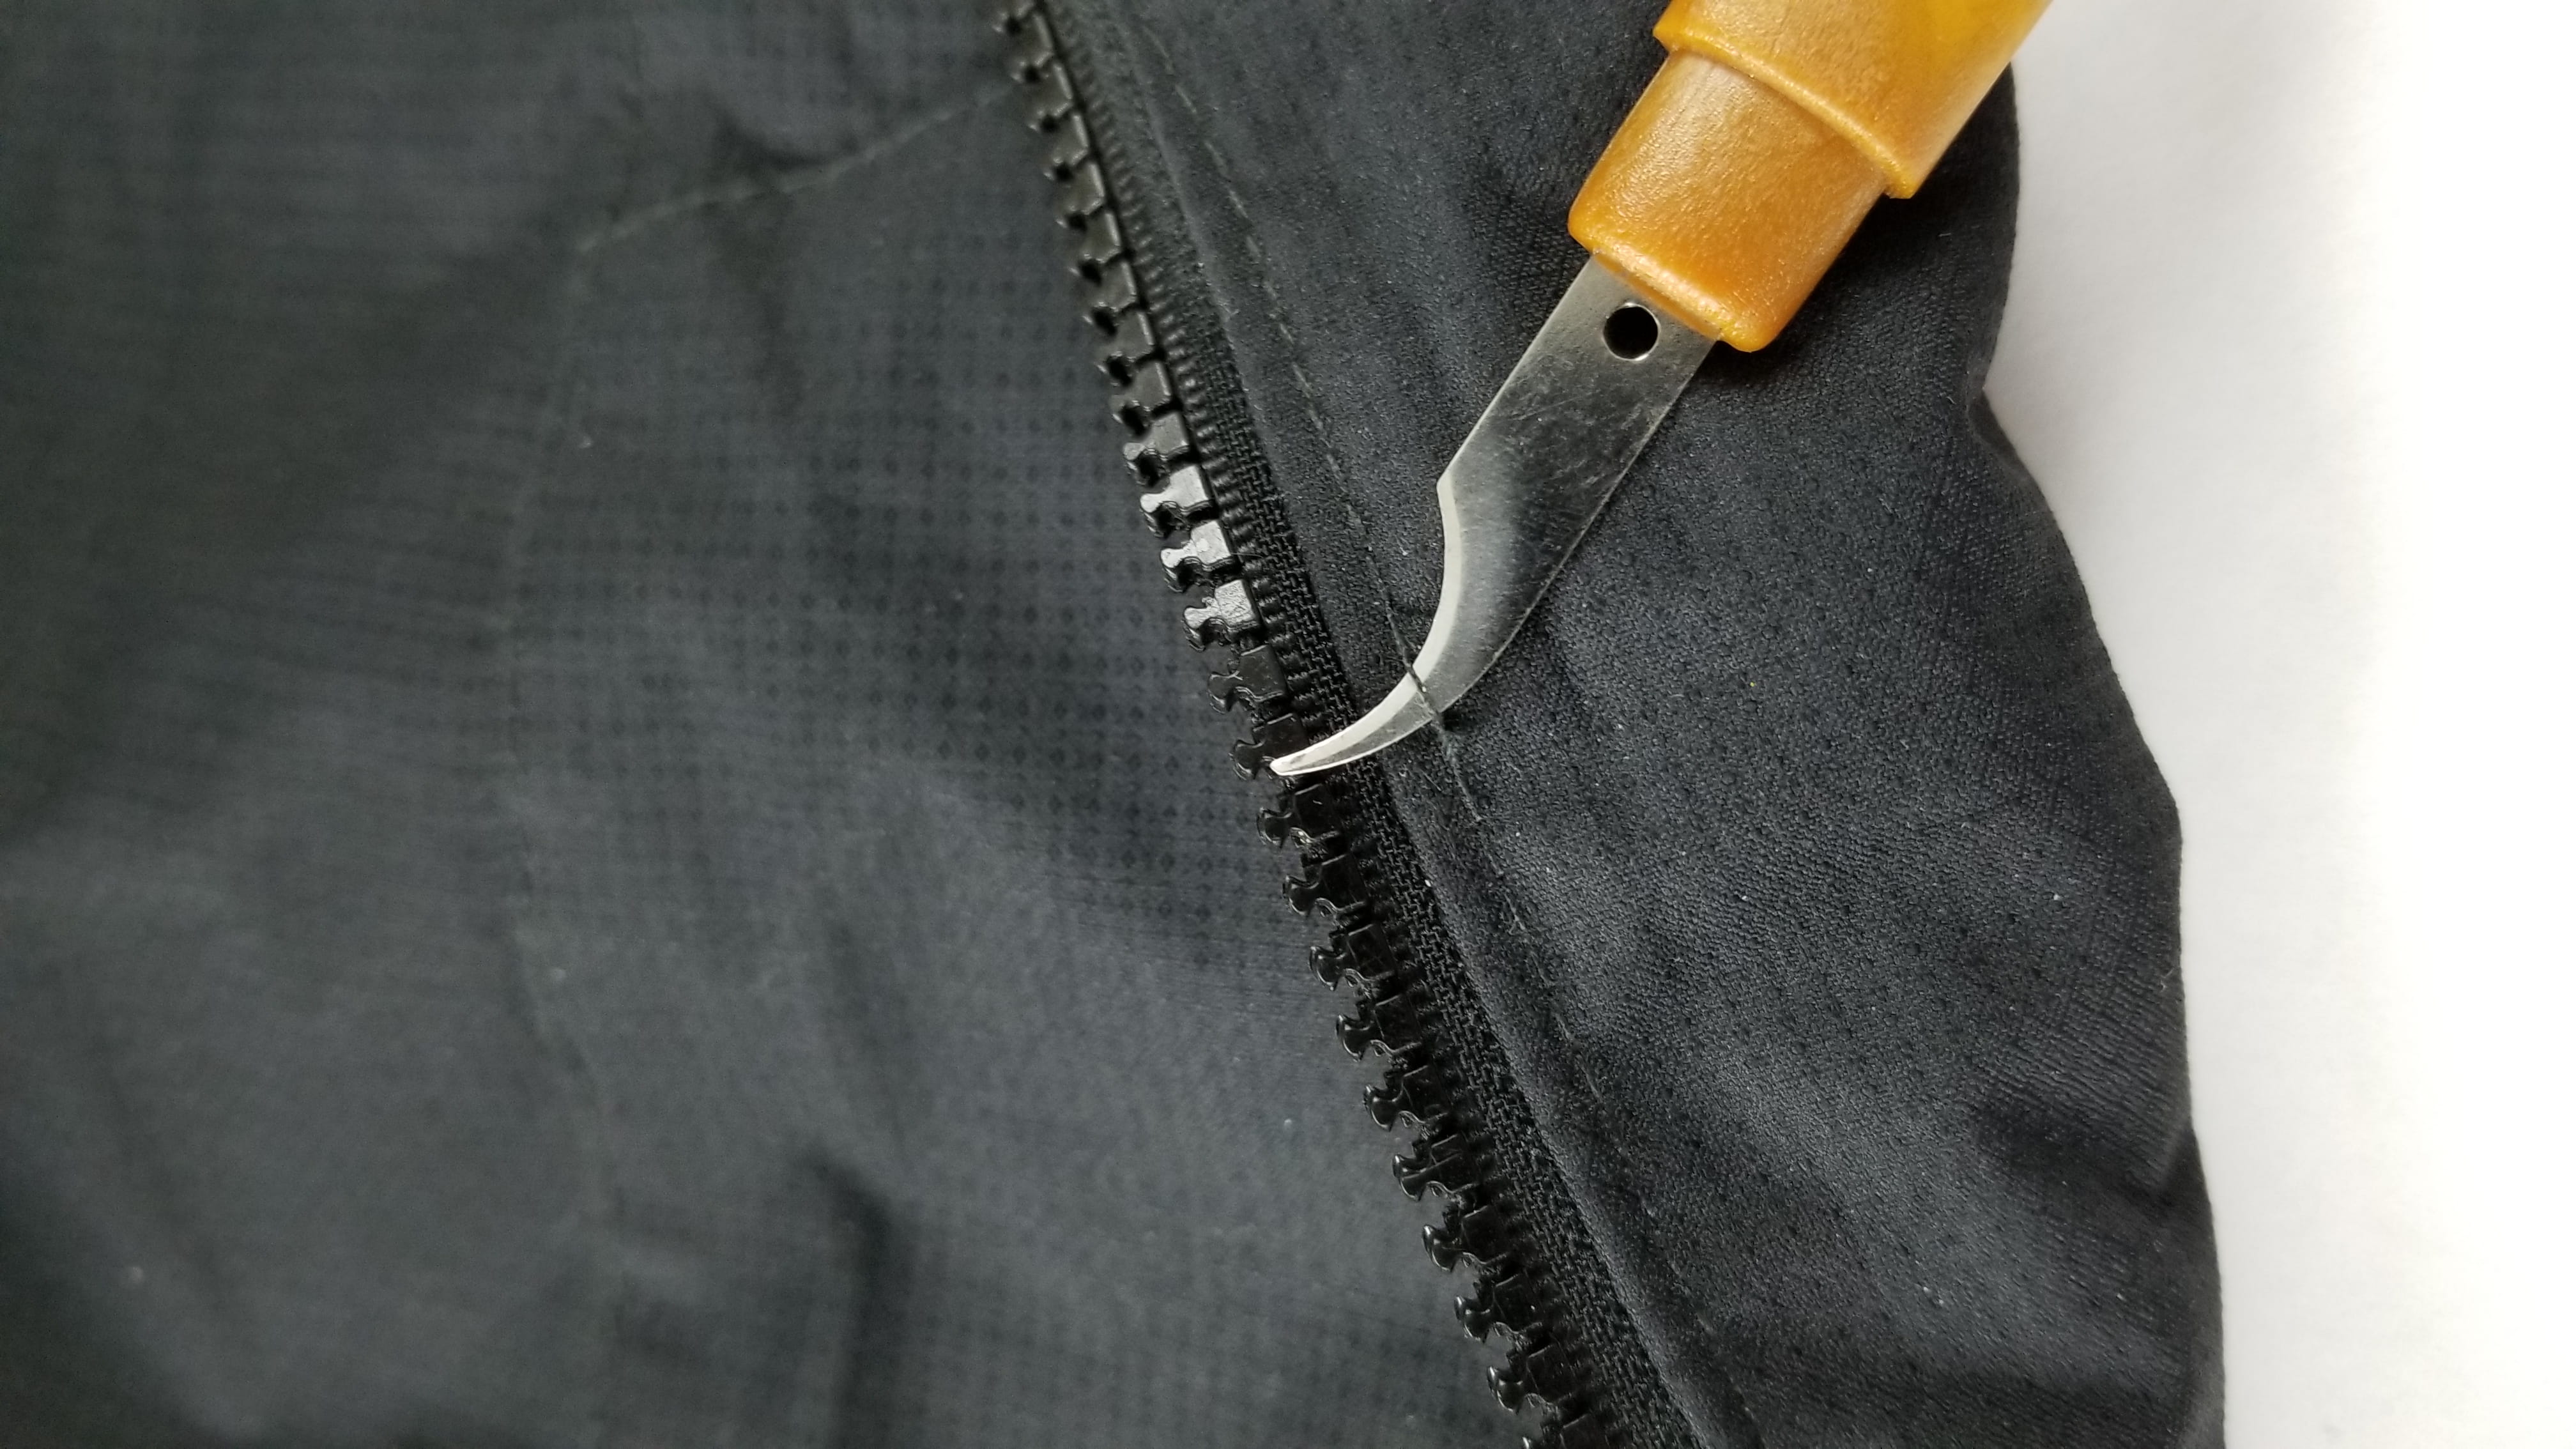 How to replace a zipper